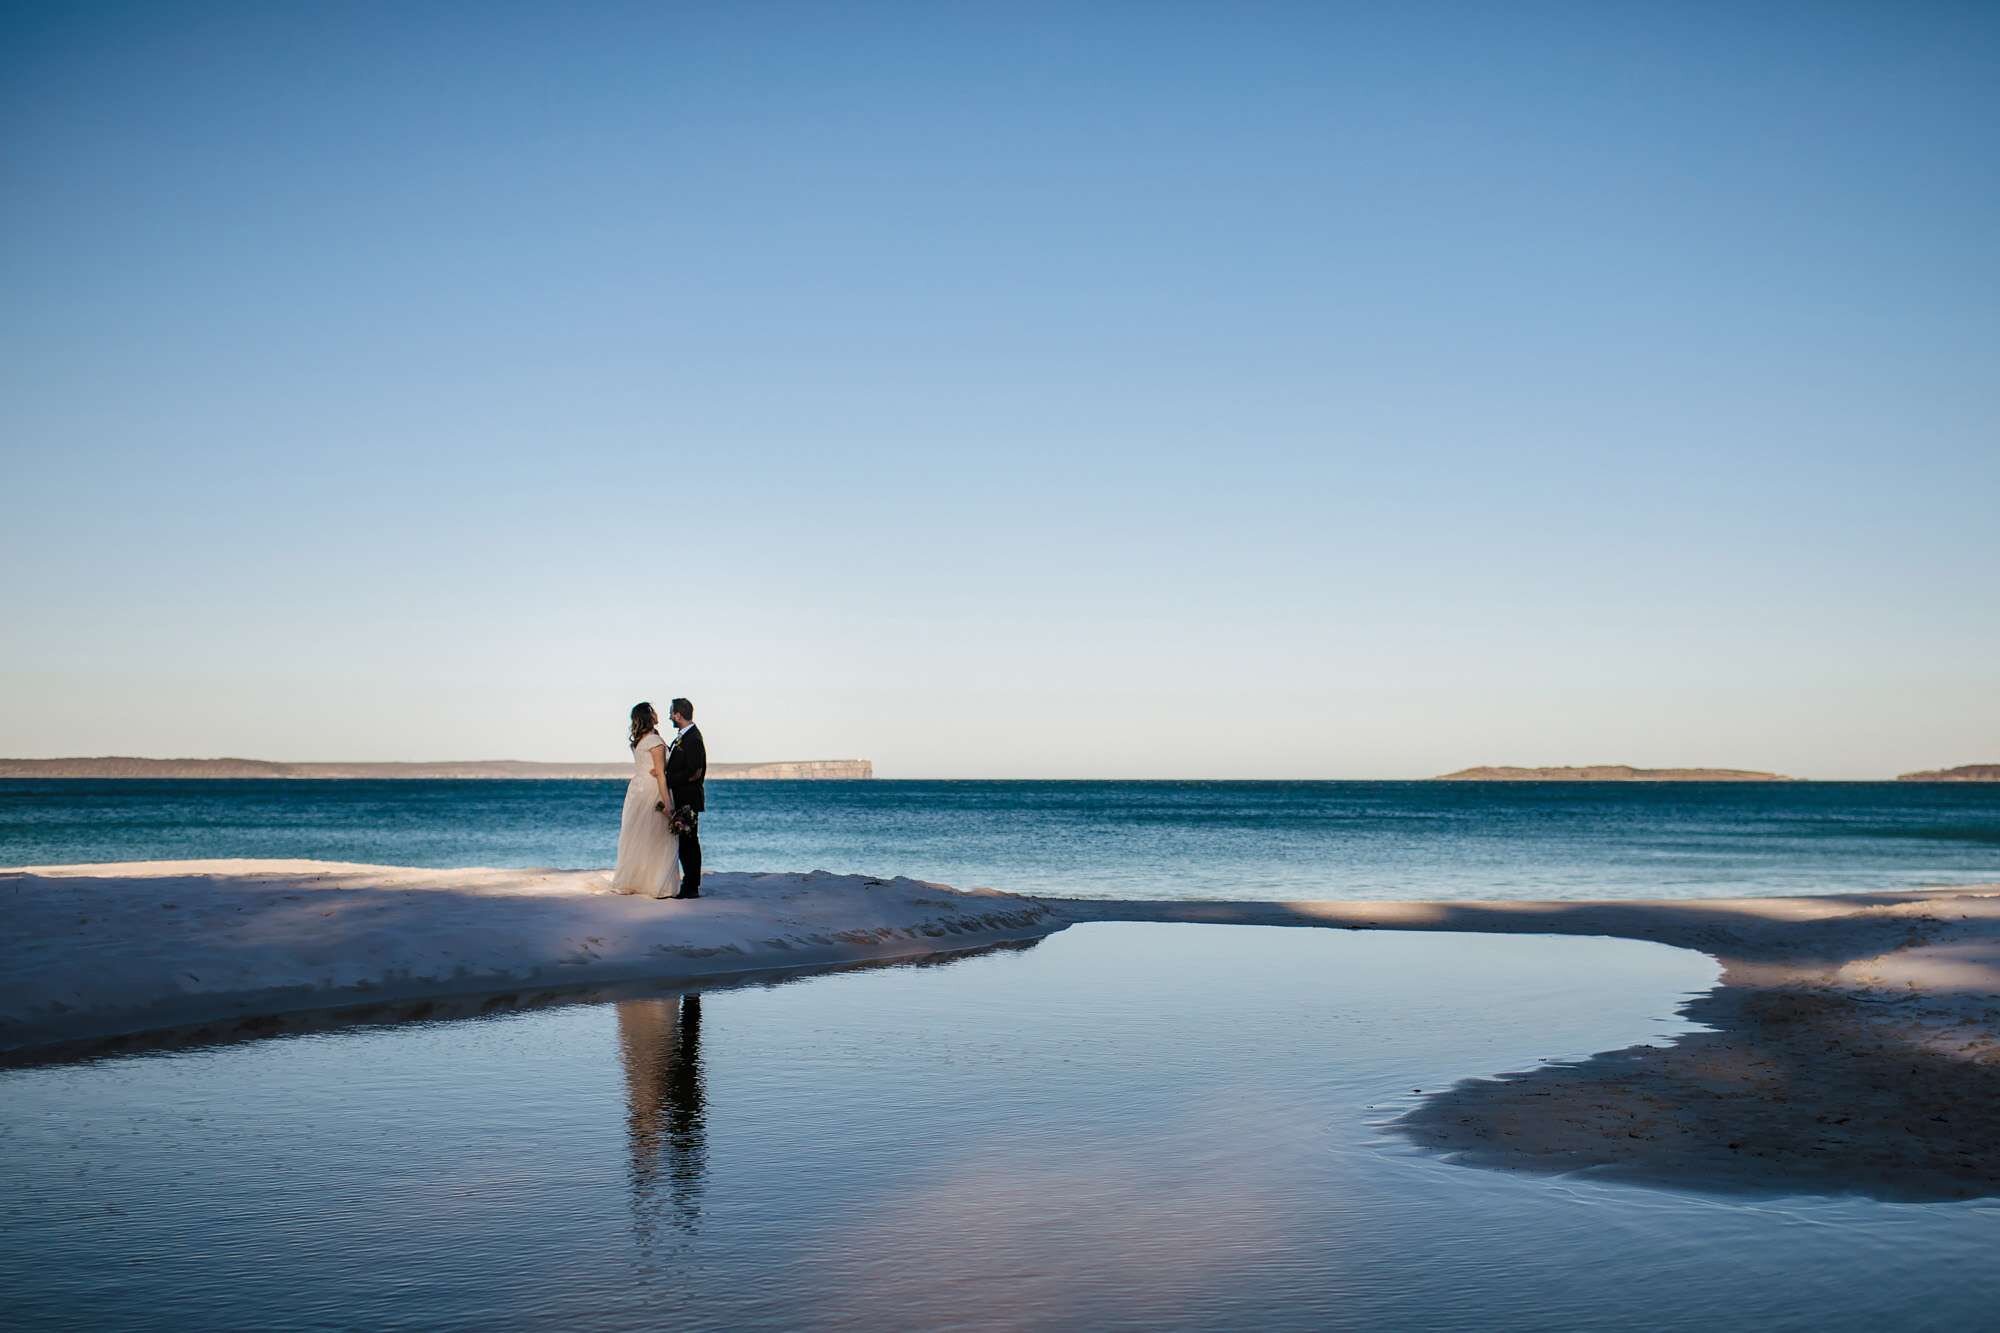 Bride and groom posing on the beach in Australia